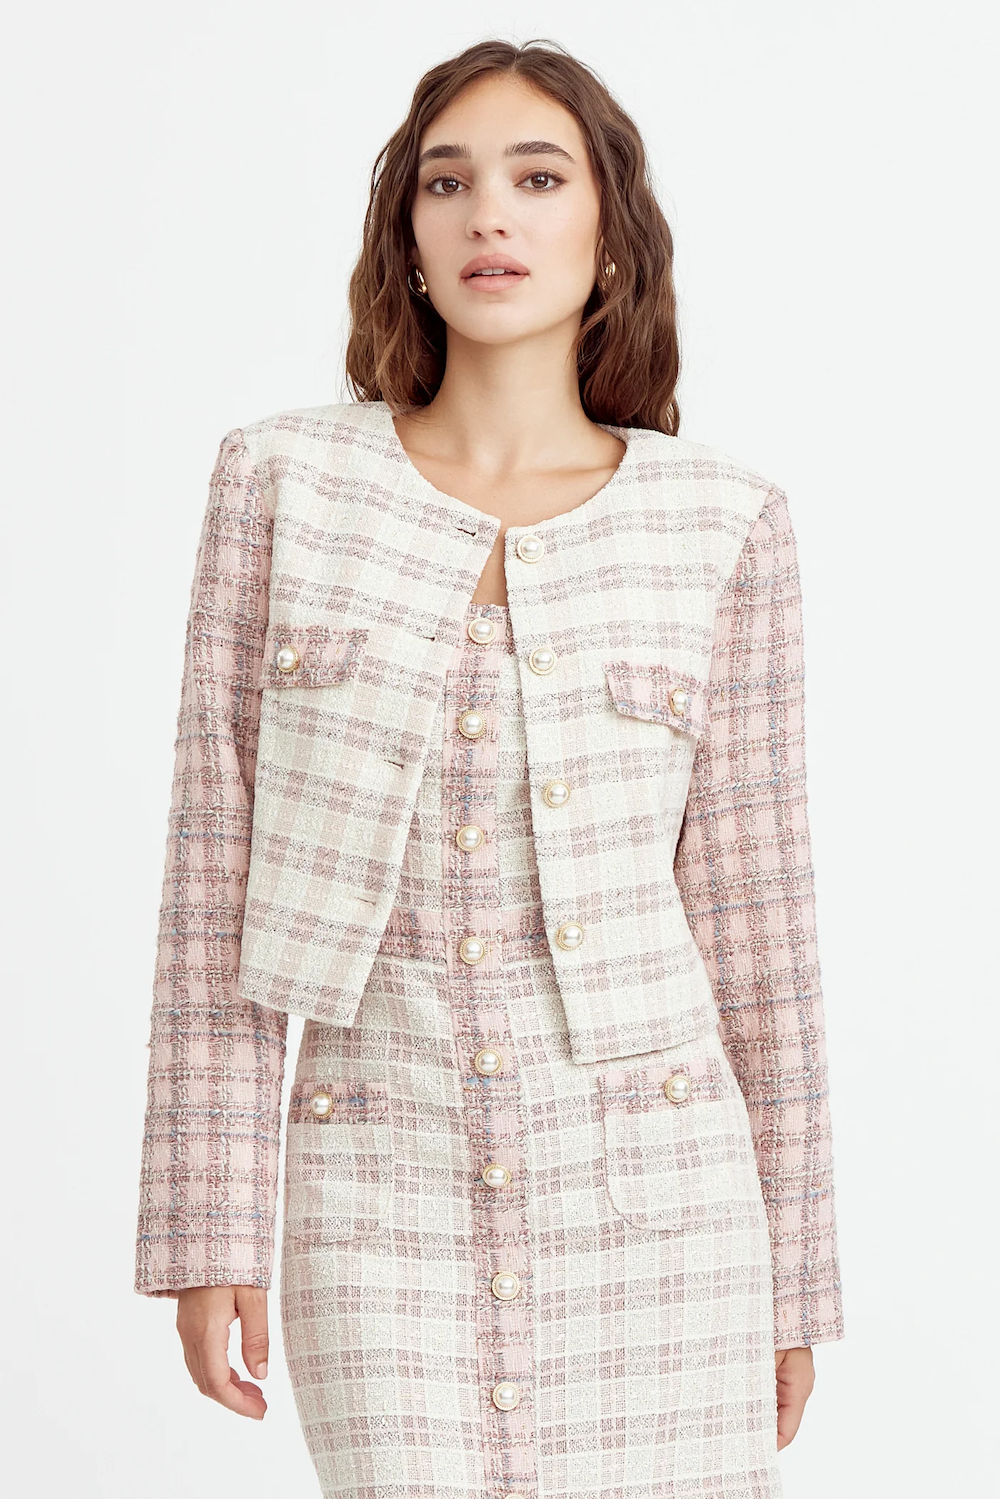 Liana mix Tweed Dress in Pink Ivory